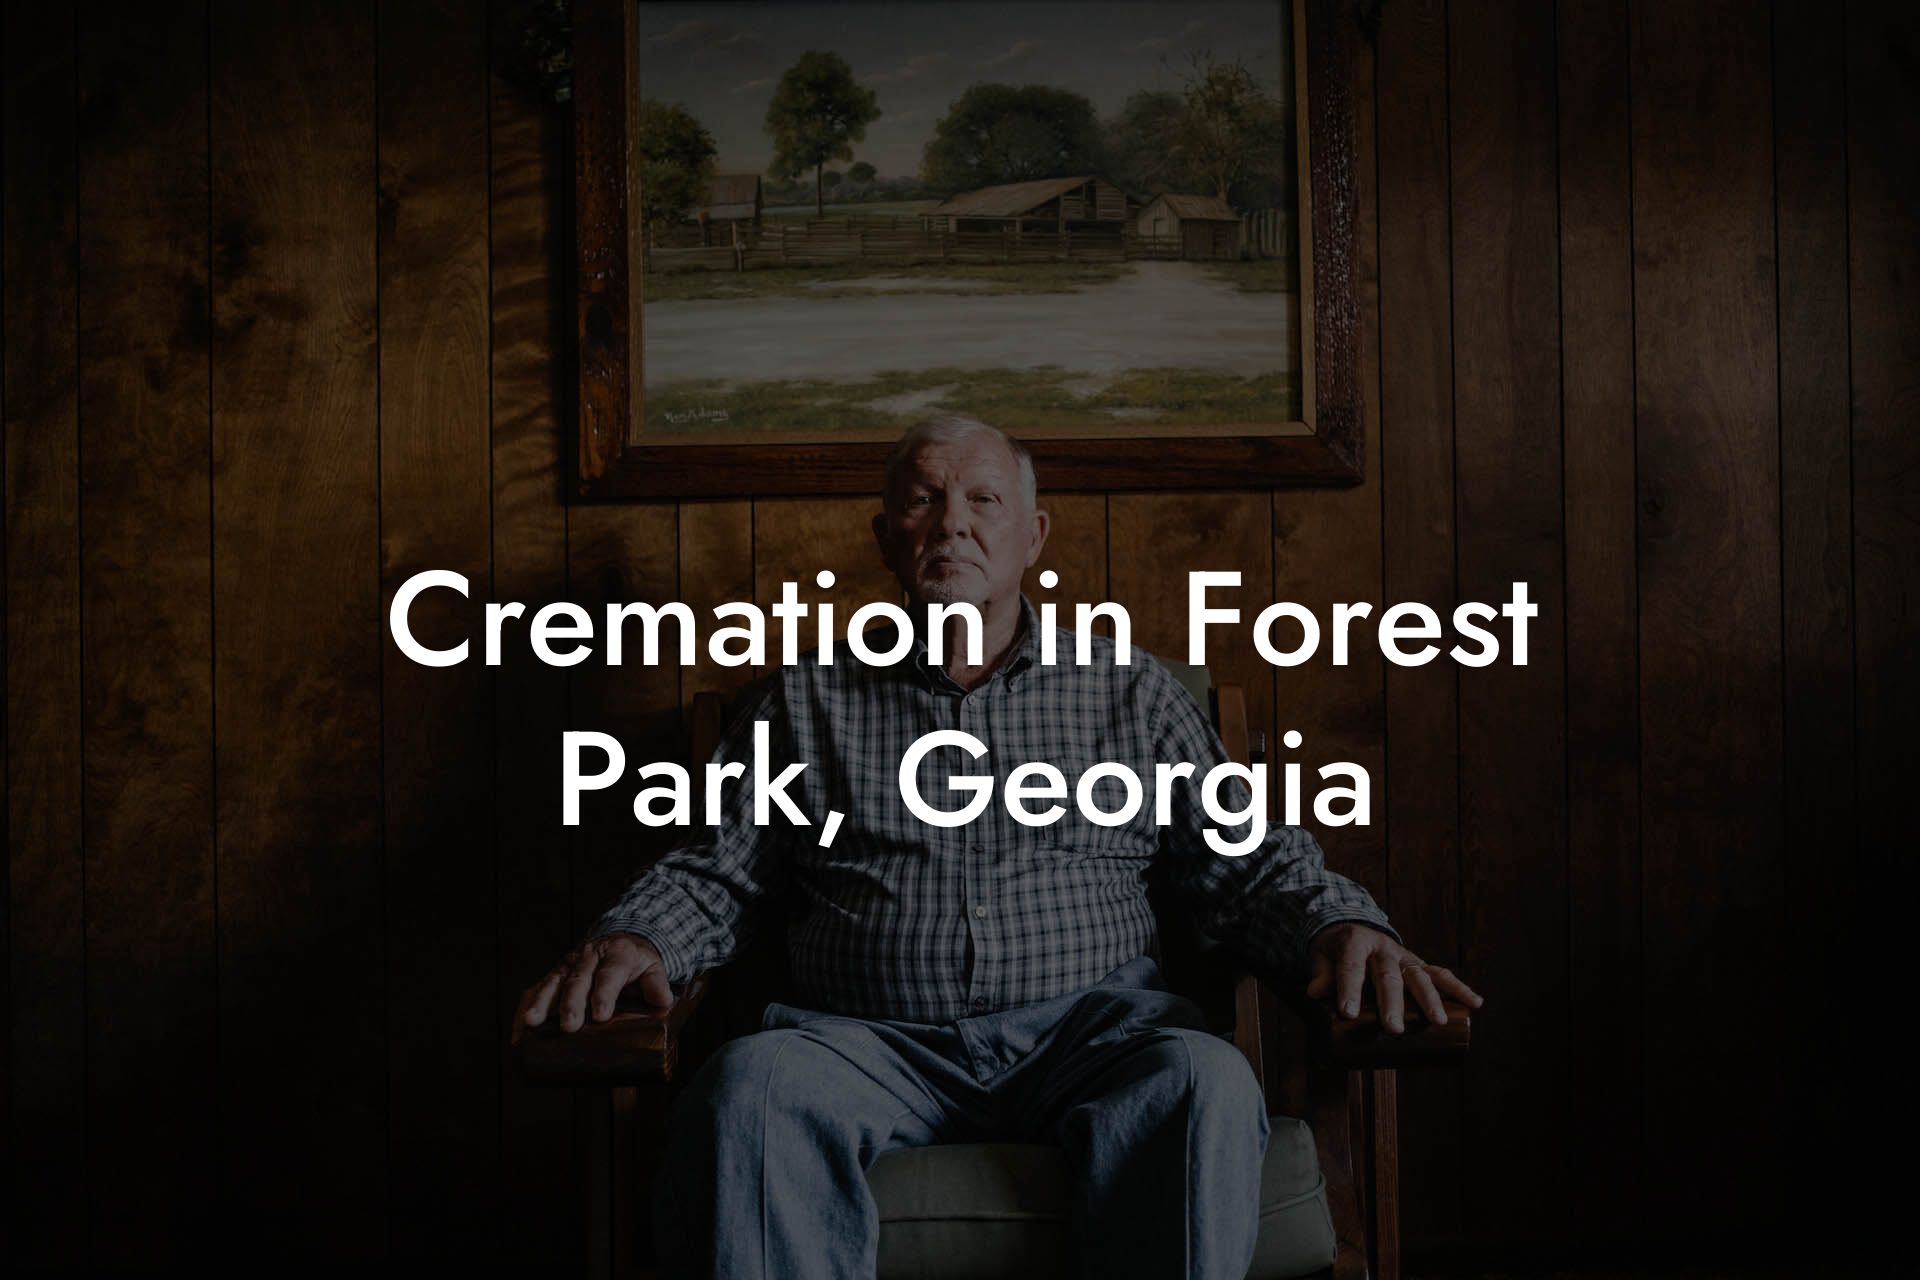 Cremation in Forest Park, Georgia